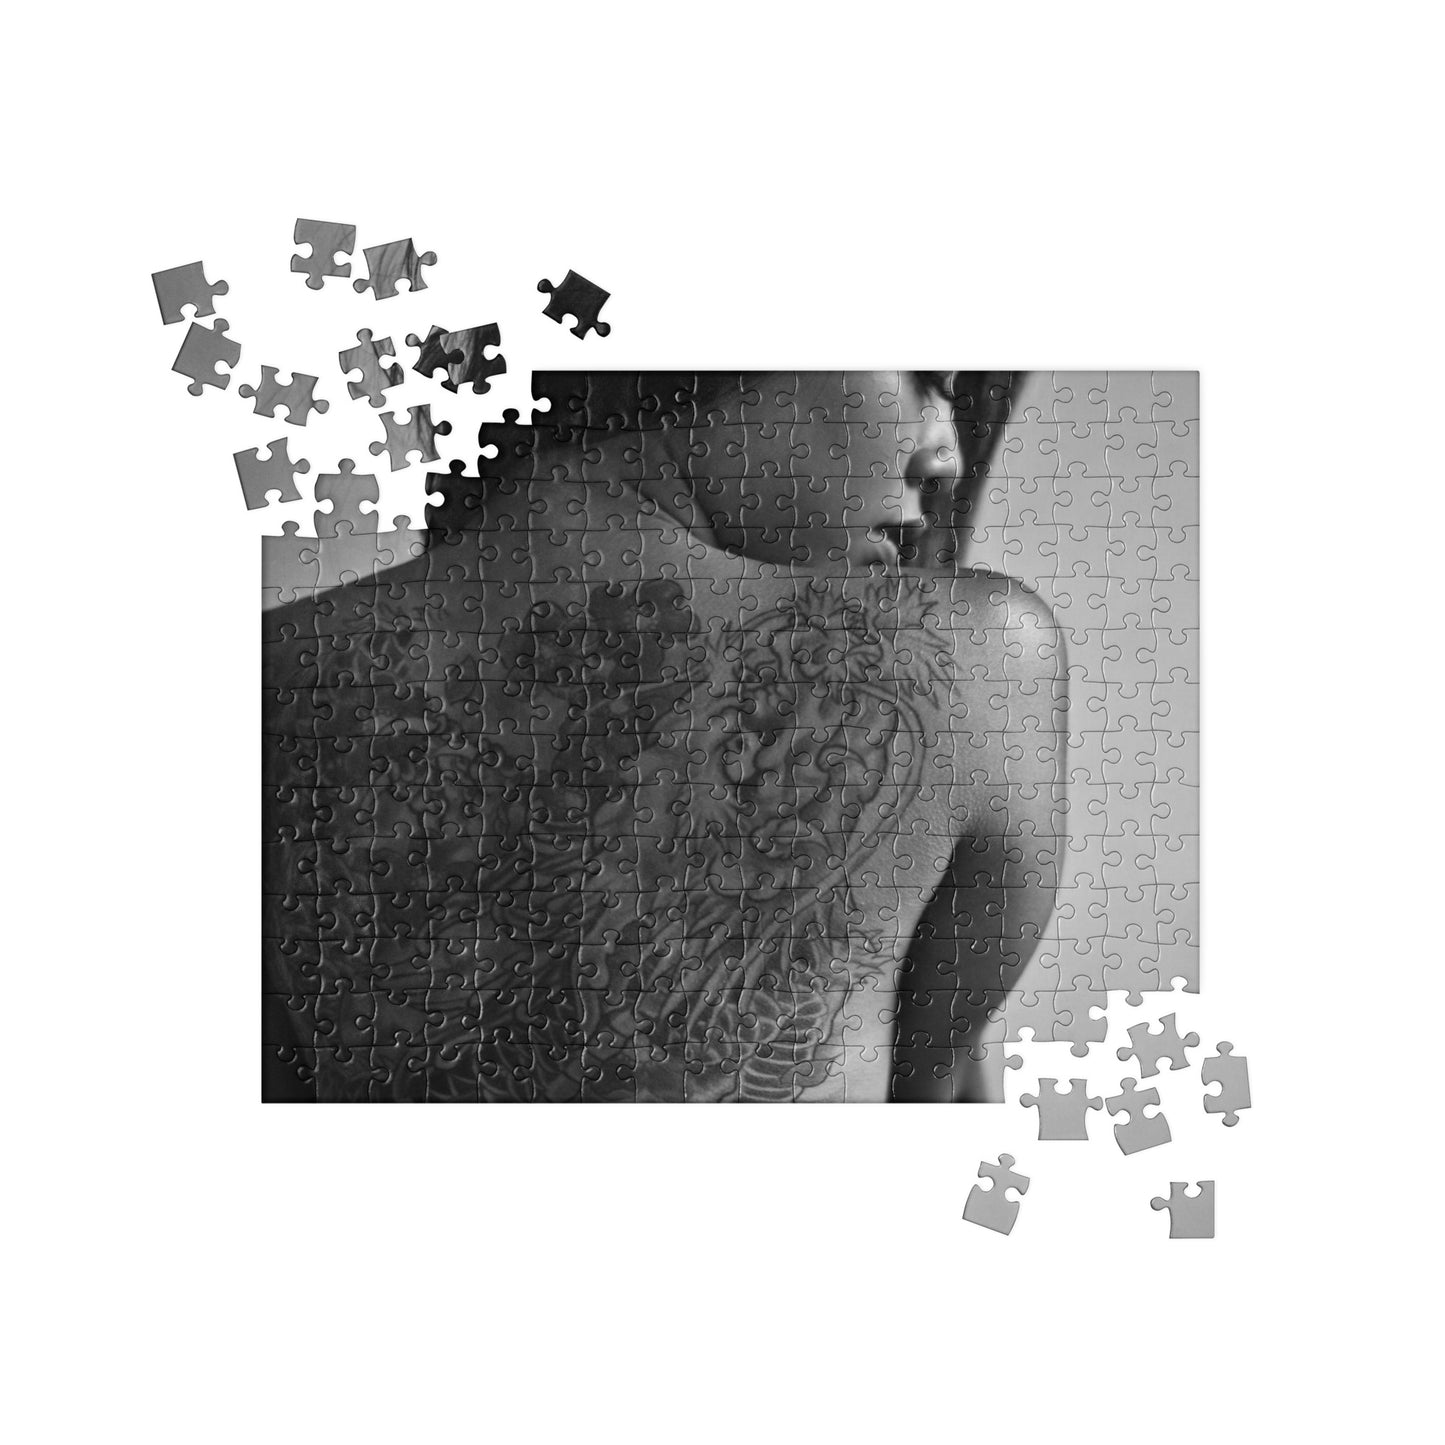 Sensual Jigsaw Puzzle: Woman Looking Over Shoulder (B&W)